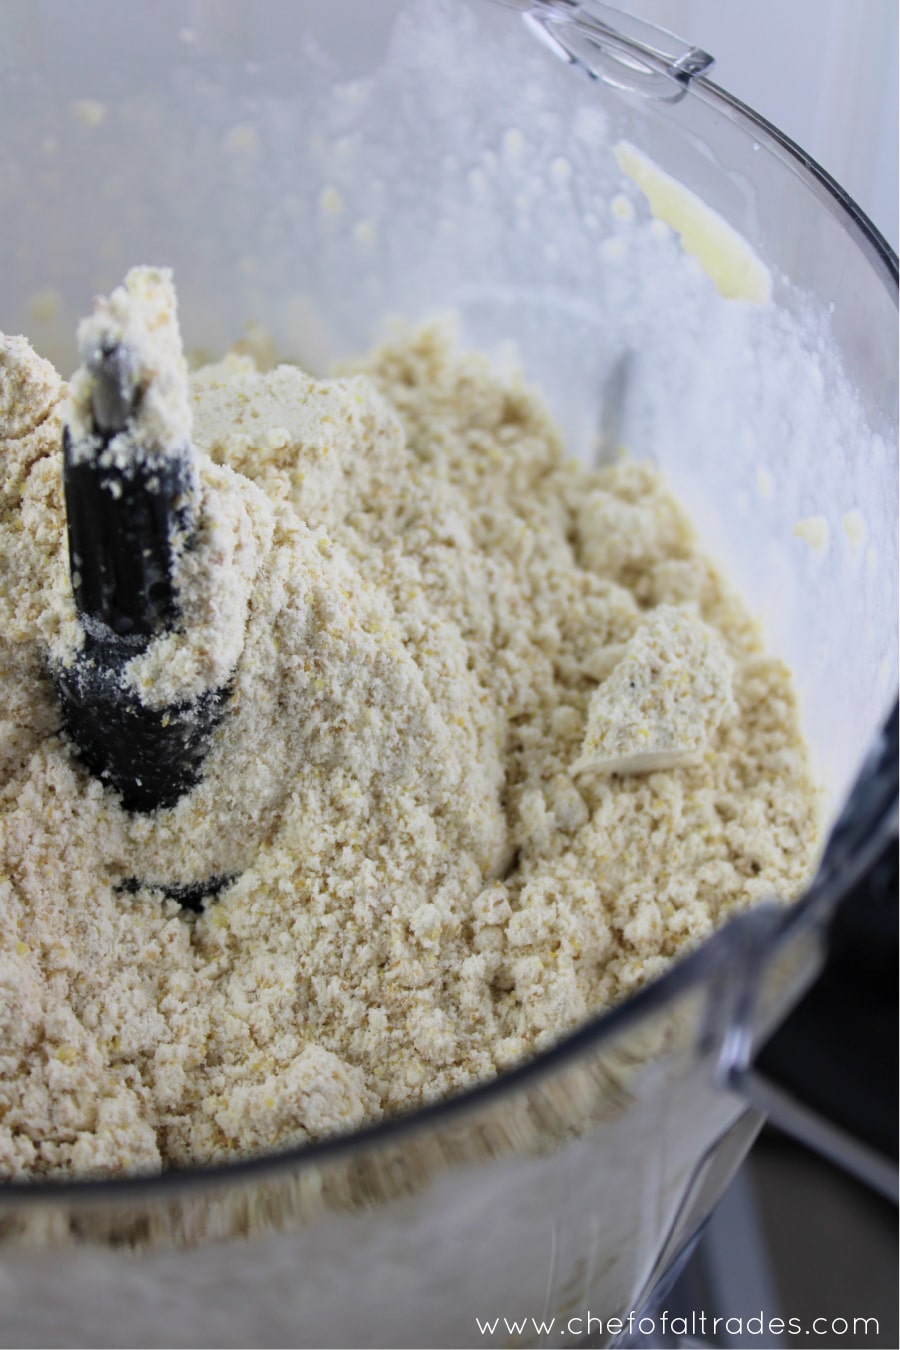 baking blend added to food processor with the other ingredients